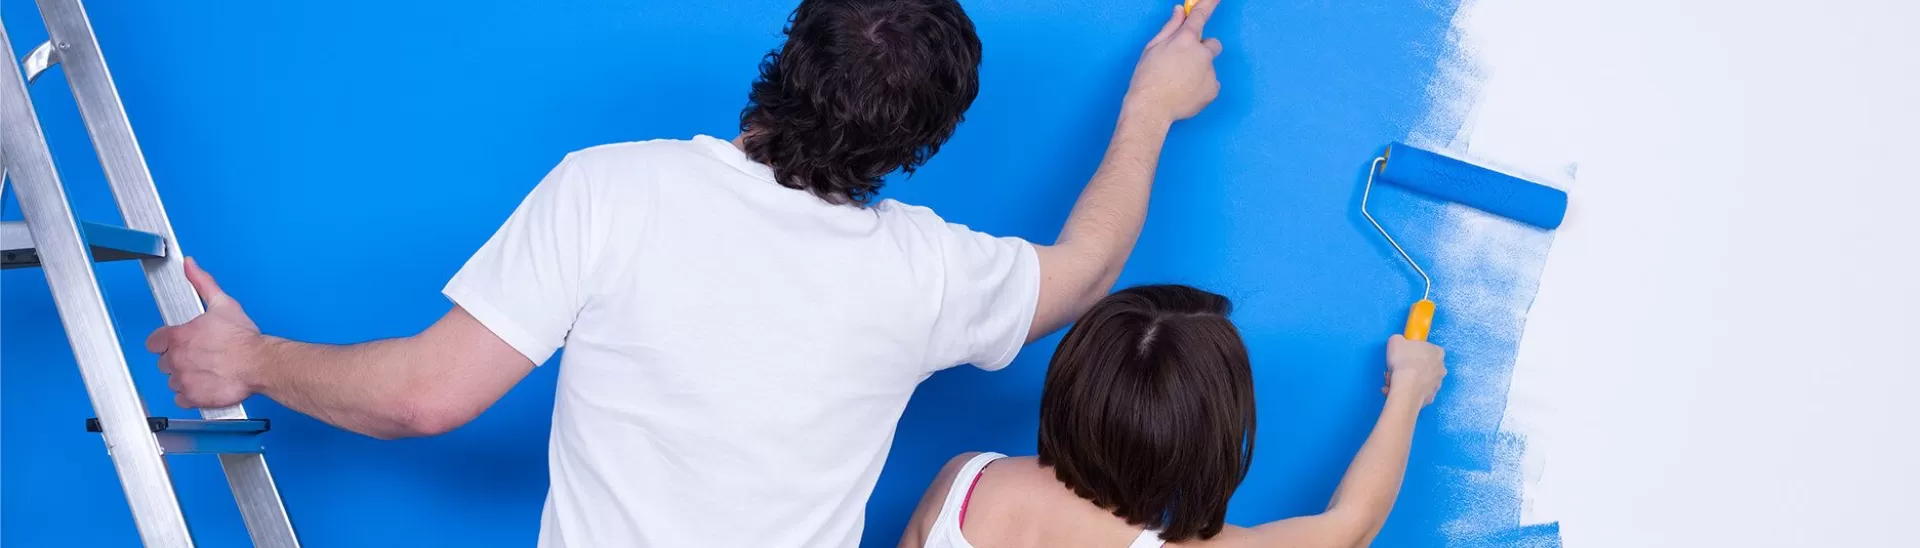 How to Paint Walls, a Step-by-Step Guide